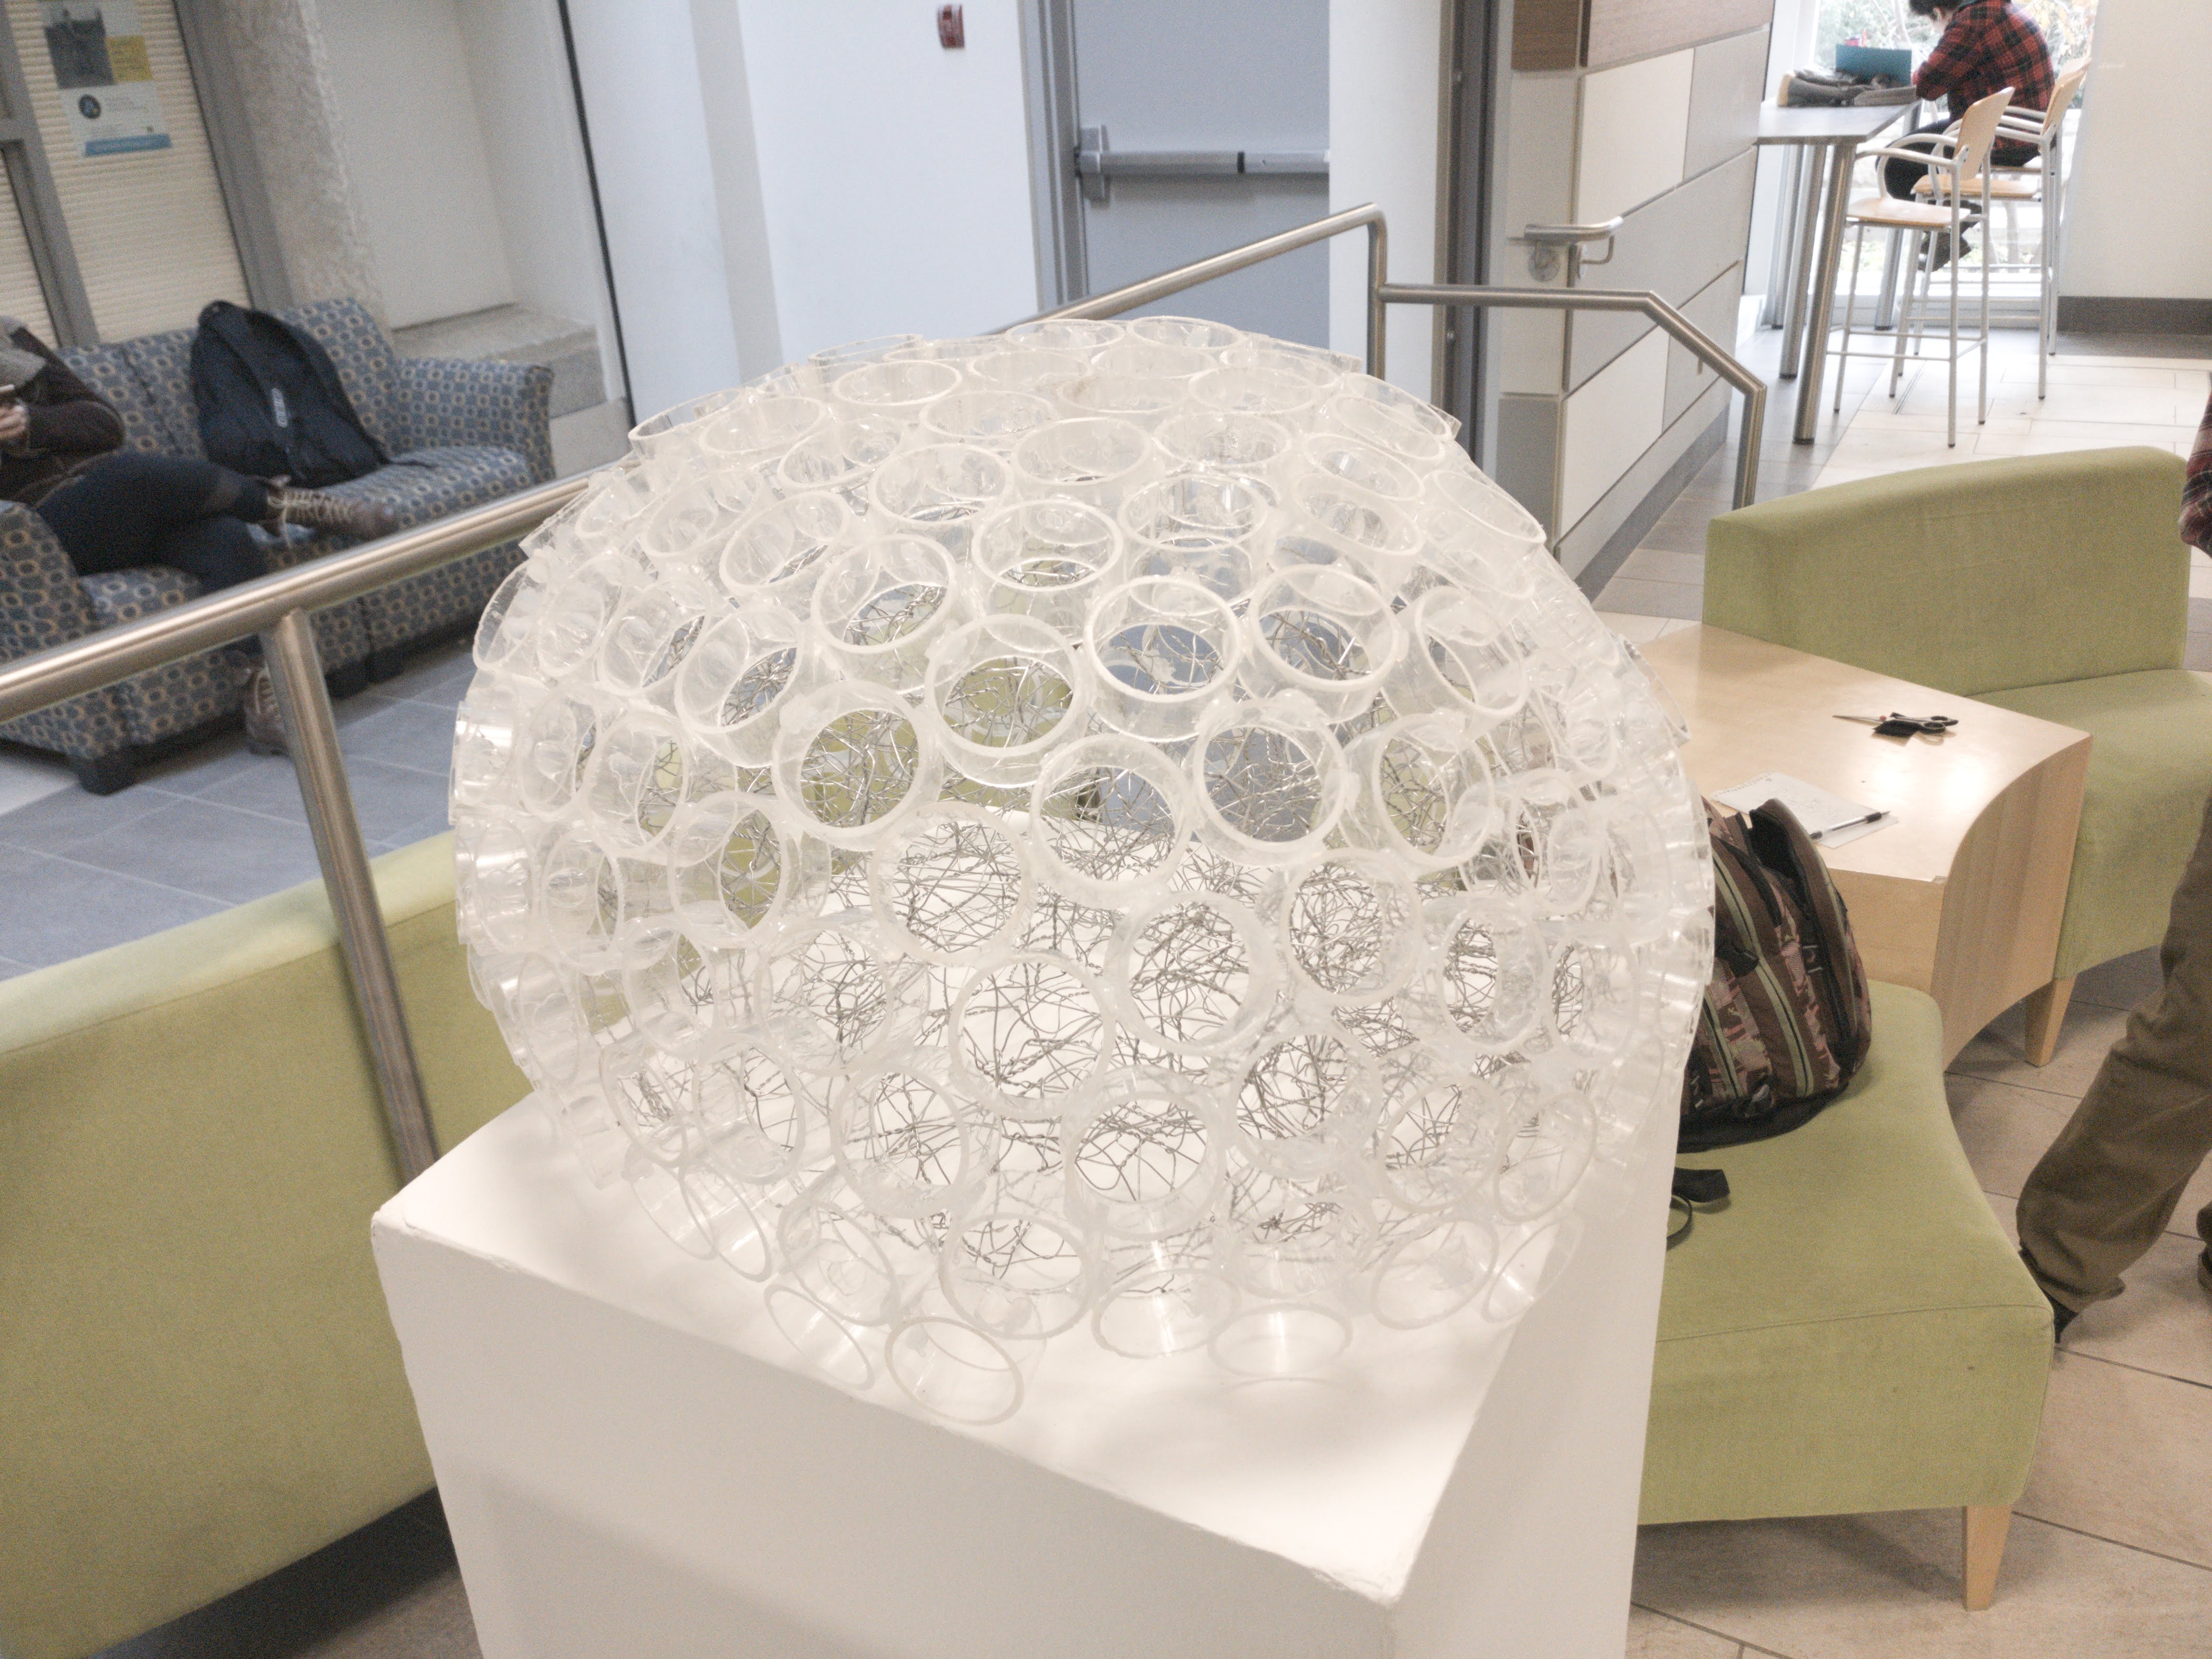 A sculpture made from reclaimed plastic tubes made by Diana Angheluta for ARTCycled 2018